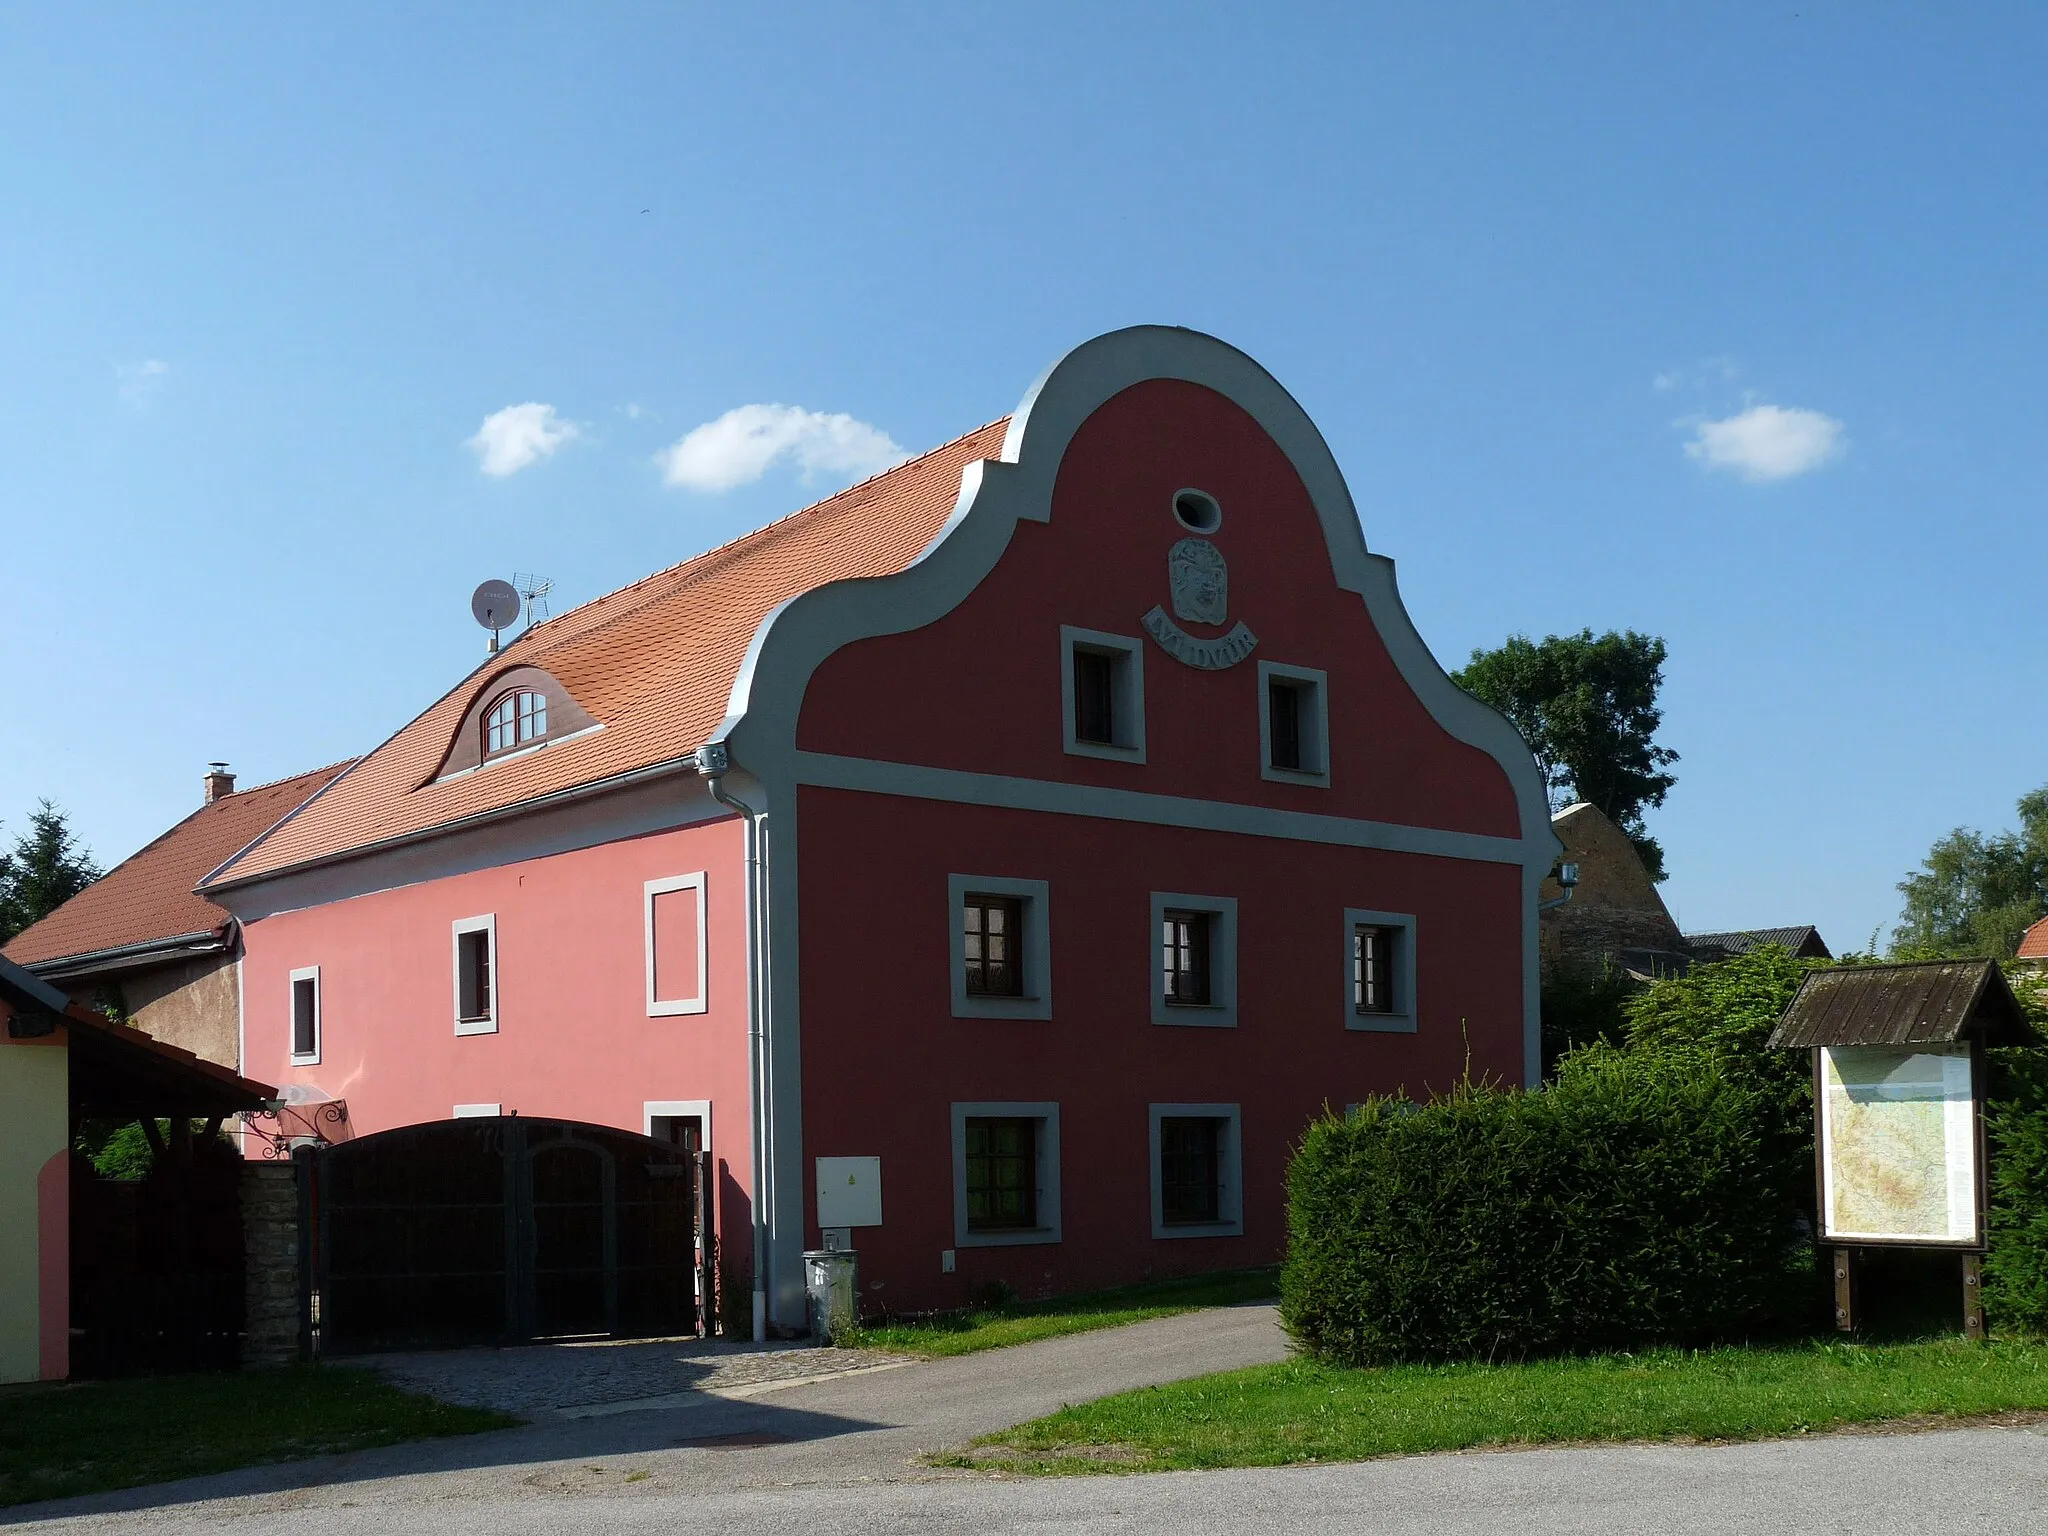 Photo showing: House No 11 in the village of Smědeč, Prachatice District, South Bohemian Region, Czech Republic.